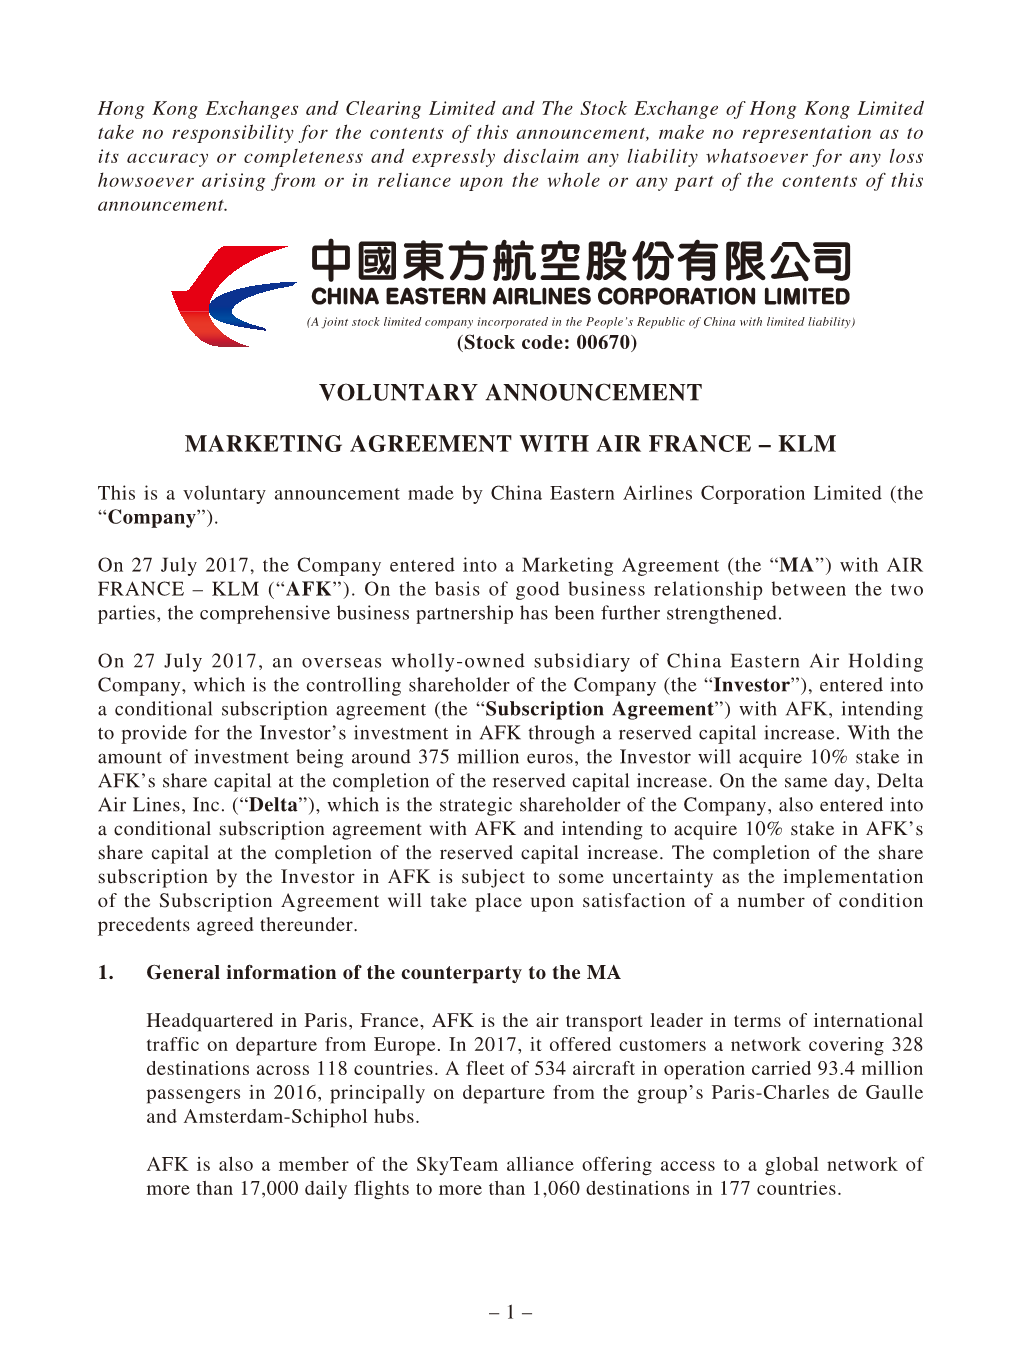 Voluntary Announcement Marketing Agreement with Air France